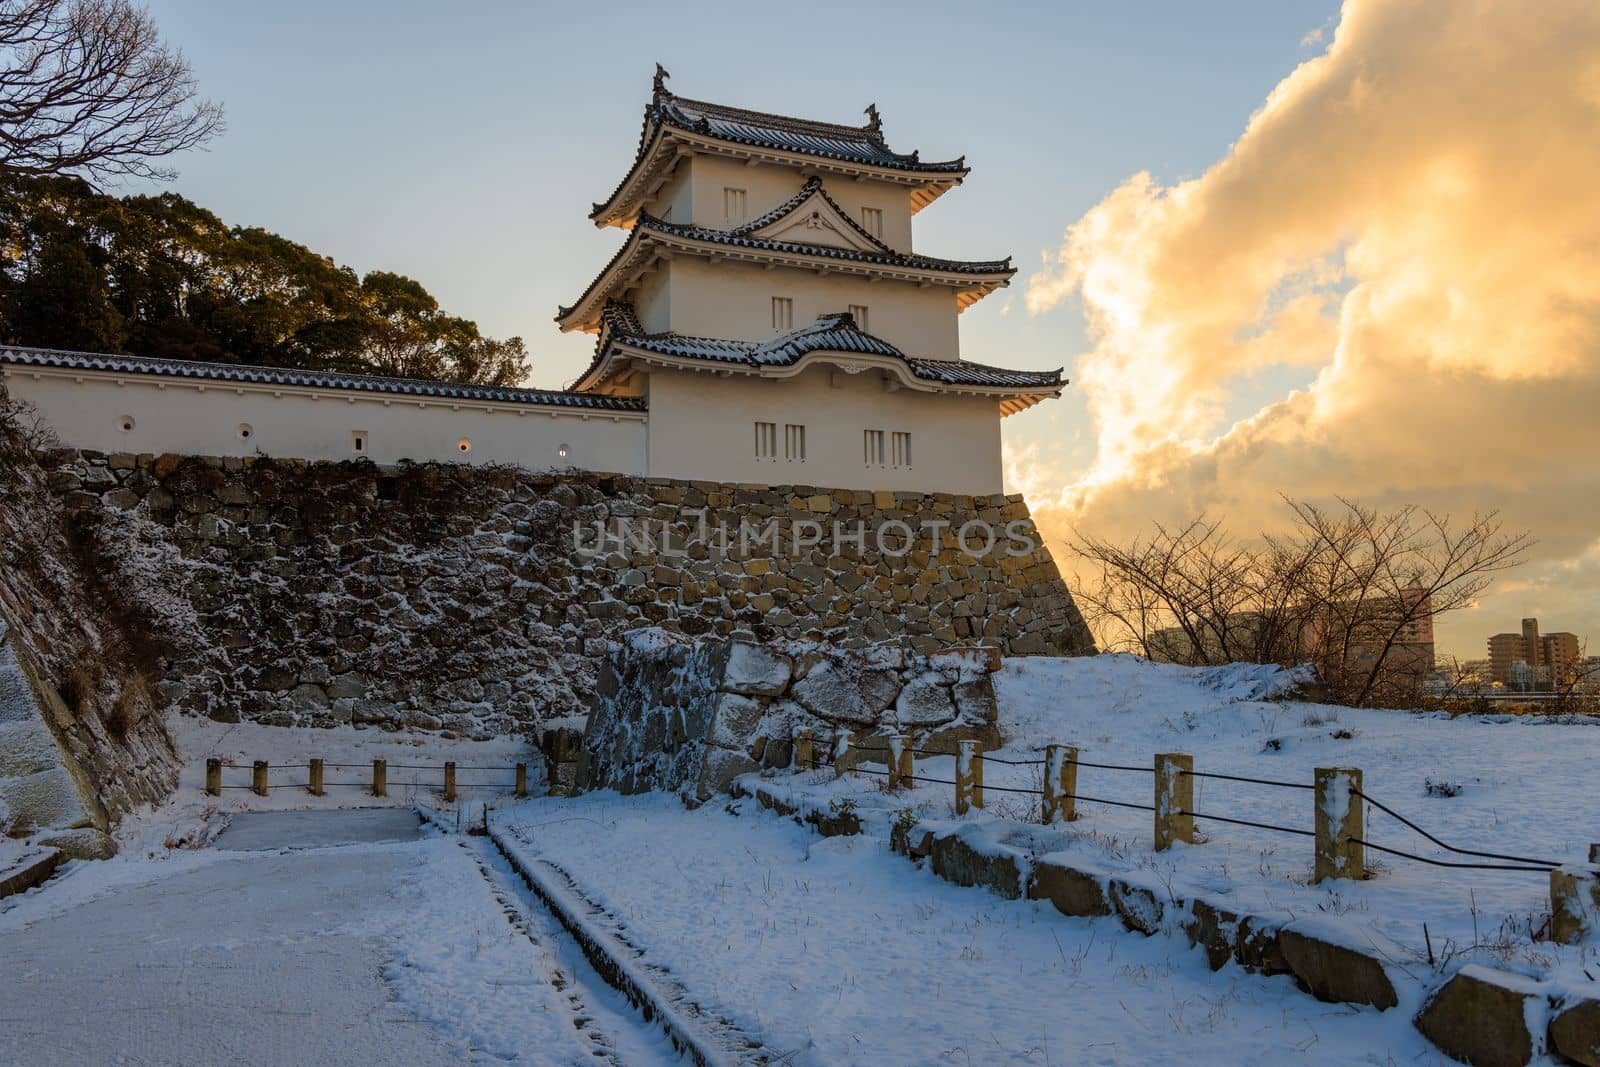 Akashi Castle tower and stone walls in snowy landscape at sunrise by Osaze